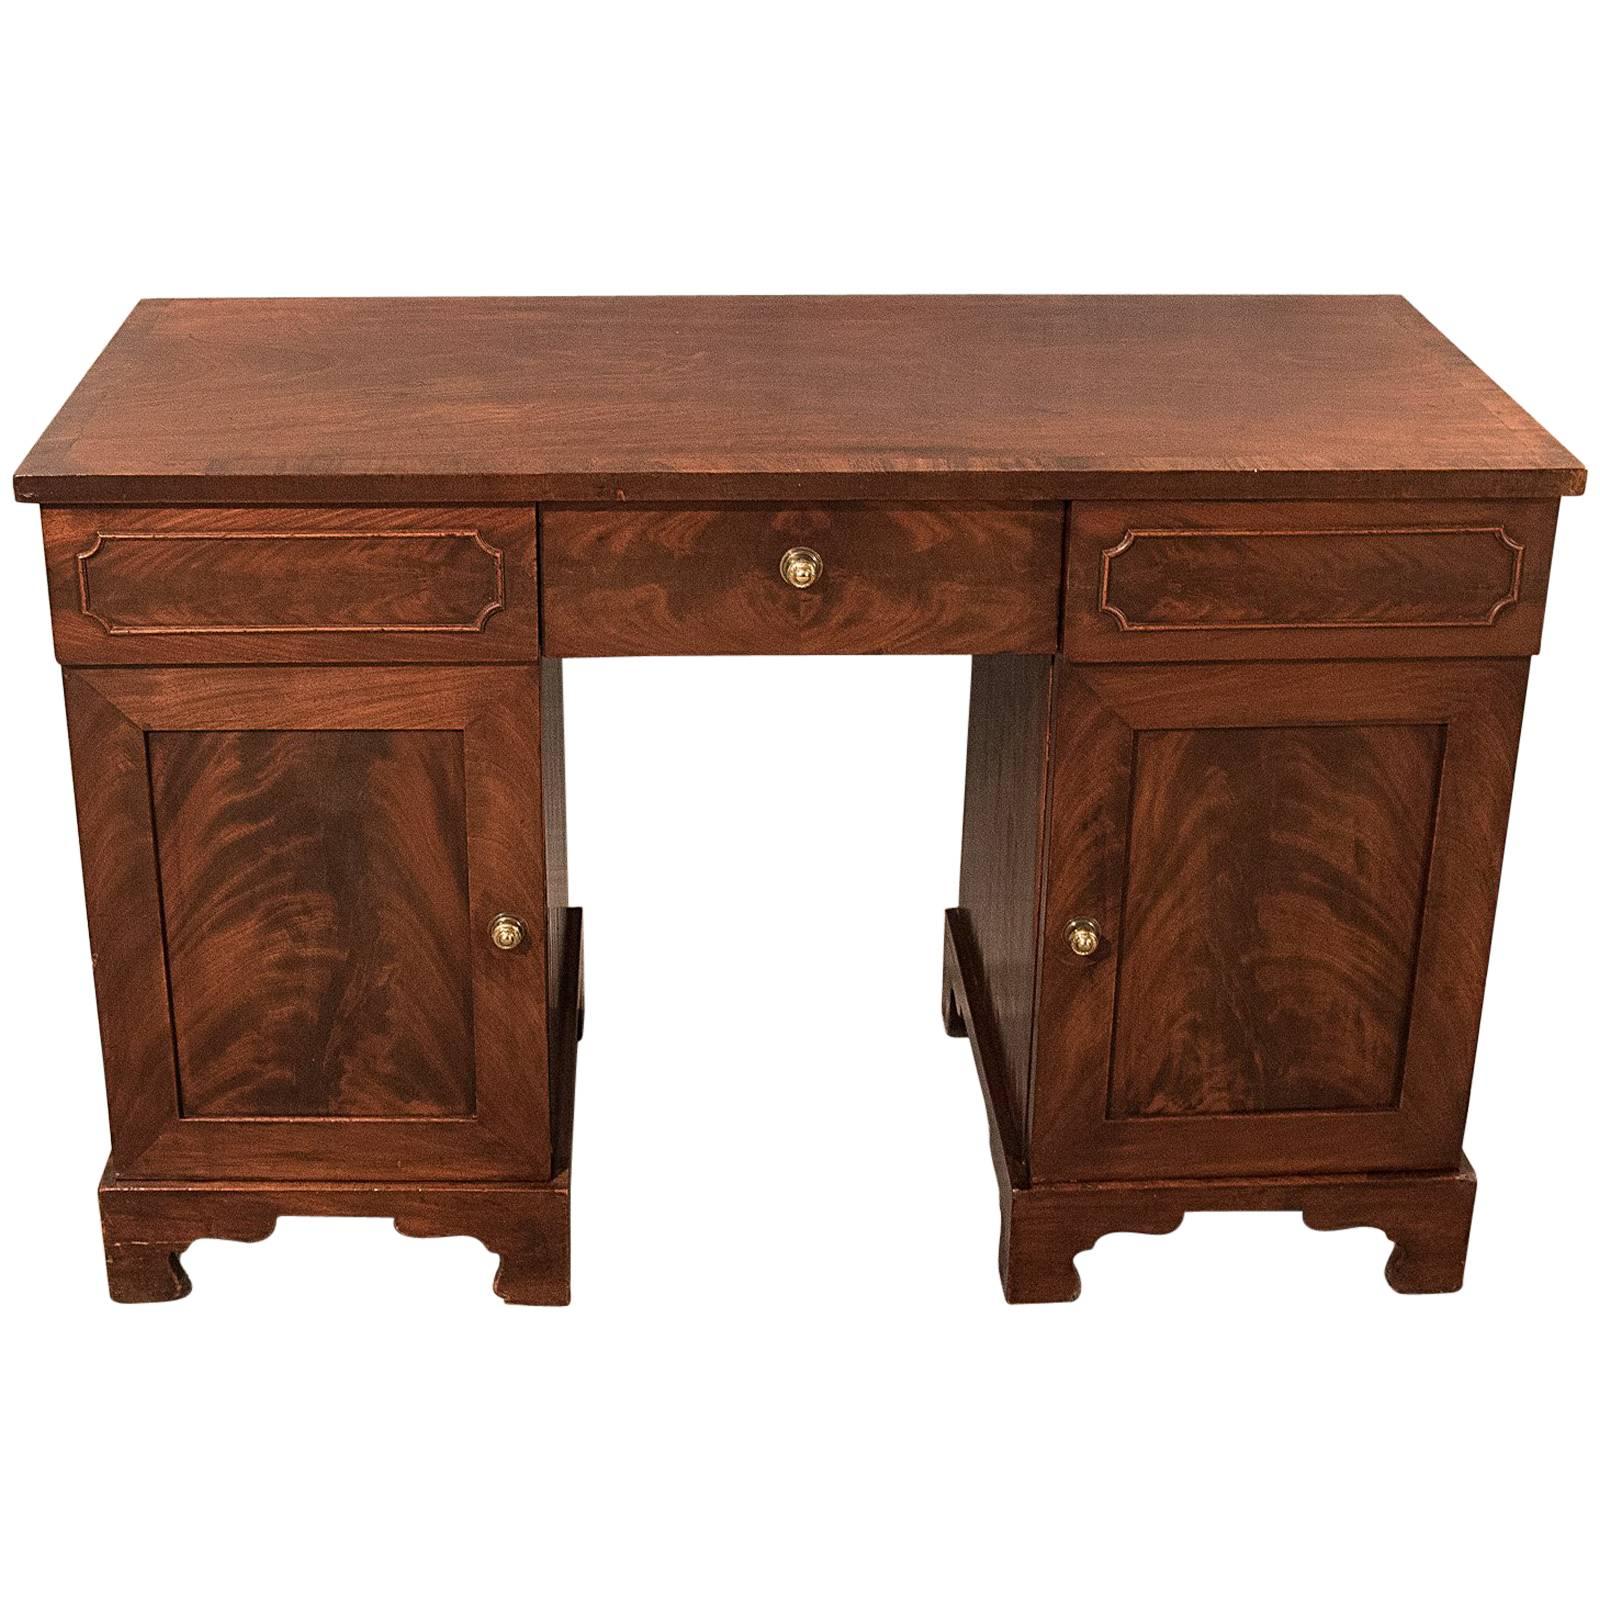 Antique Pedestal Desk Study Table Quality Flame Mahogany Victorian English